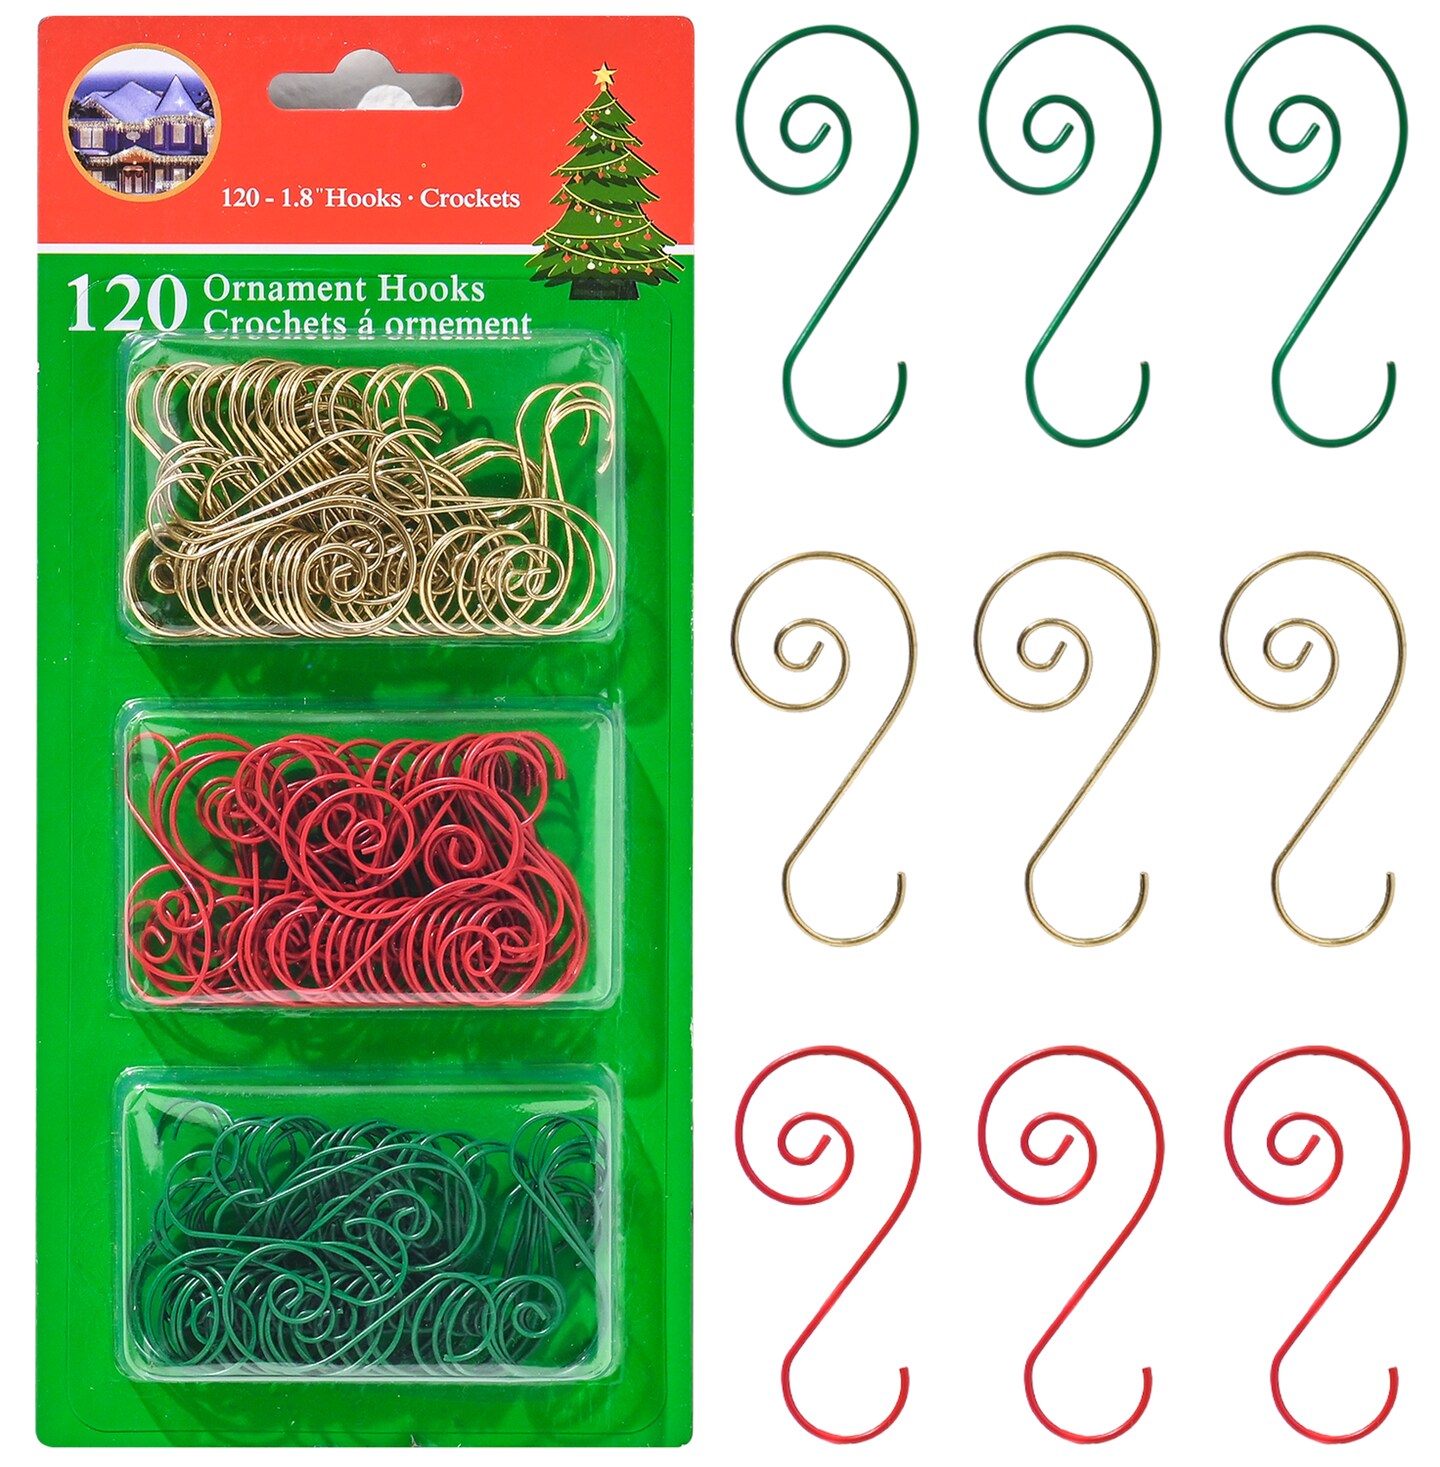 R N&#x27; D Toys Tree Ornament Hooks - Christmas Tree Decorating Metal Wire Hangers for Hanging Decorations &#x2013; Assorted Colors Red, Green and Gold, Pack of 120